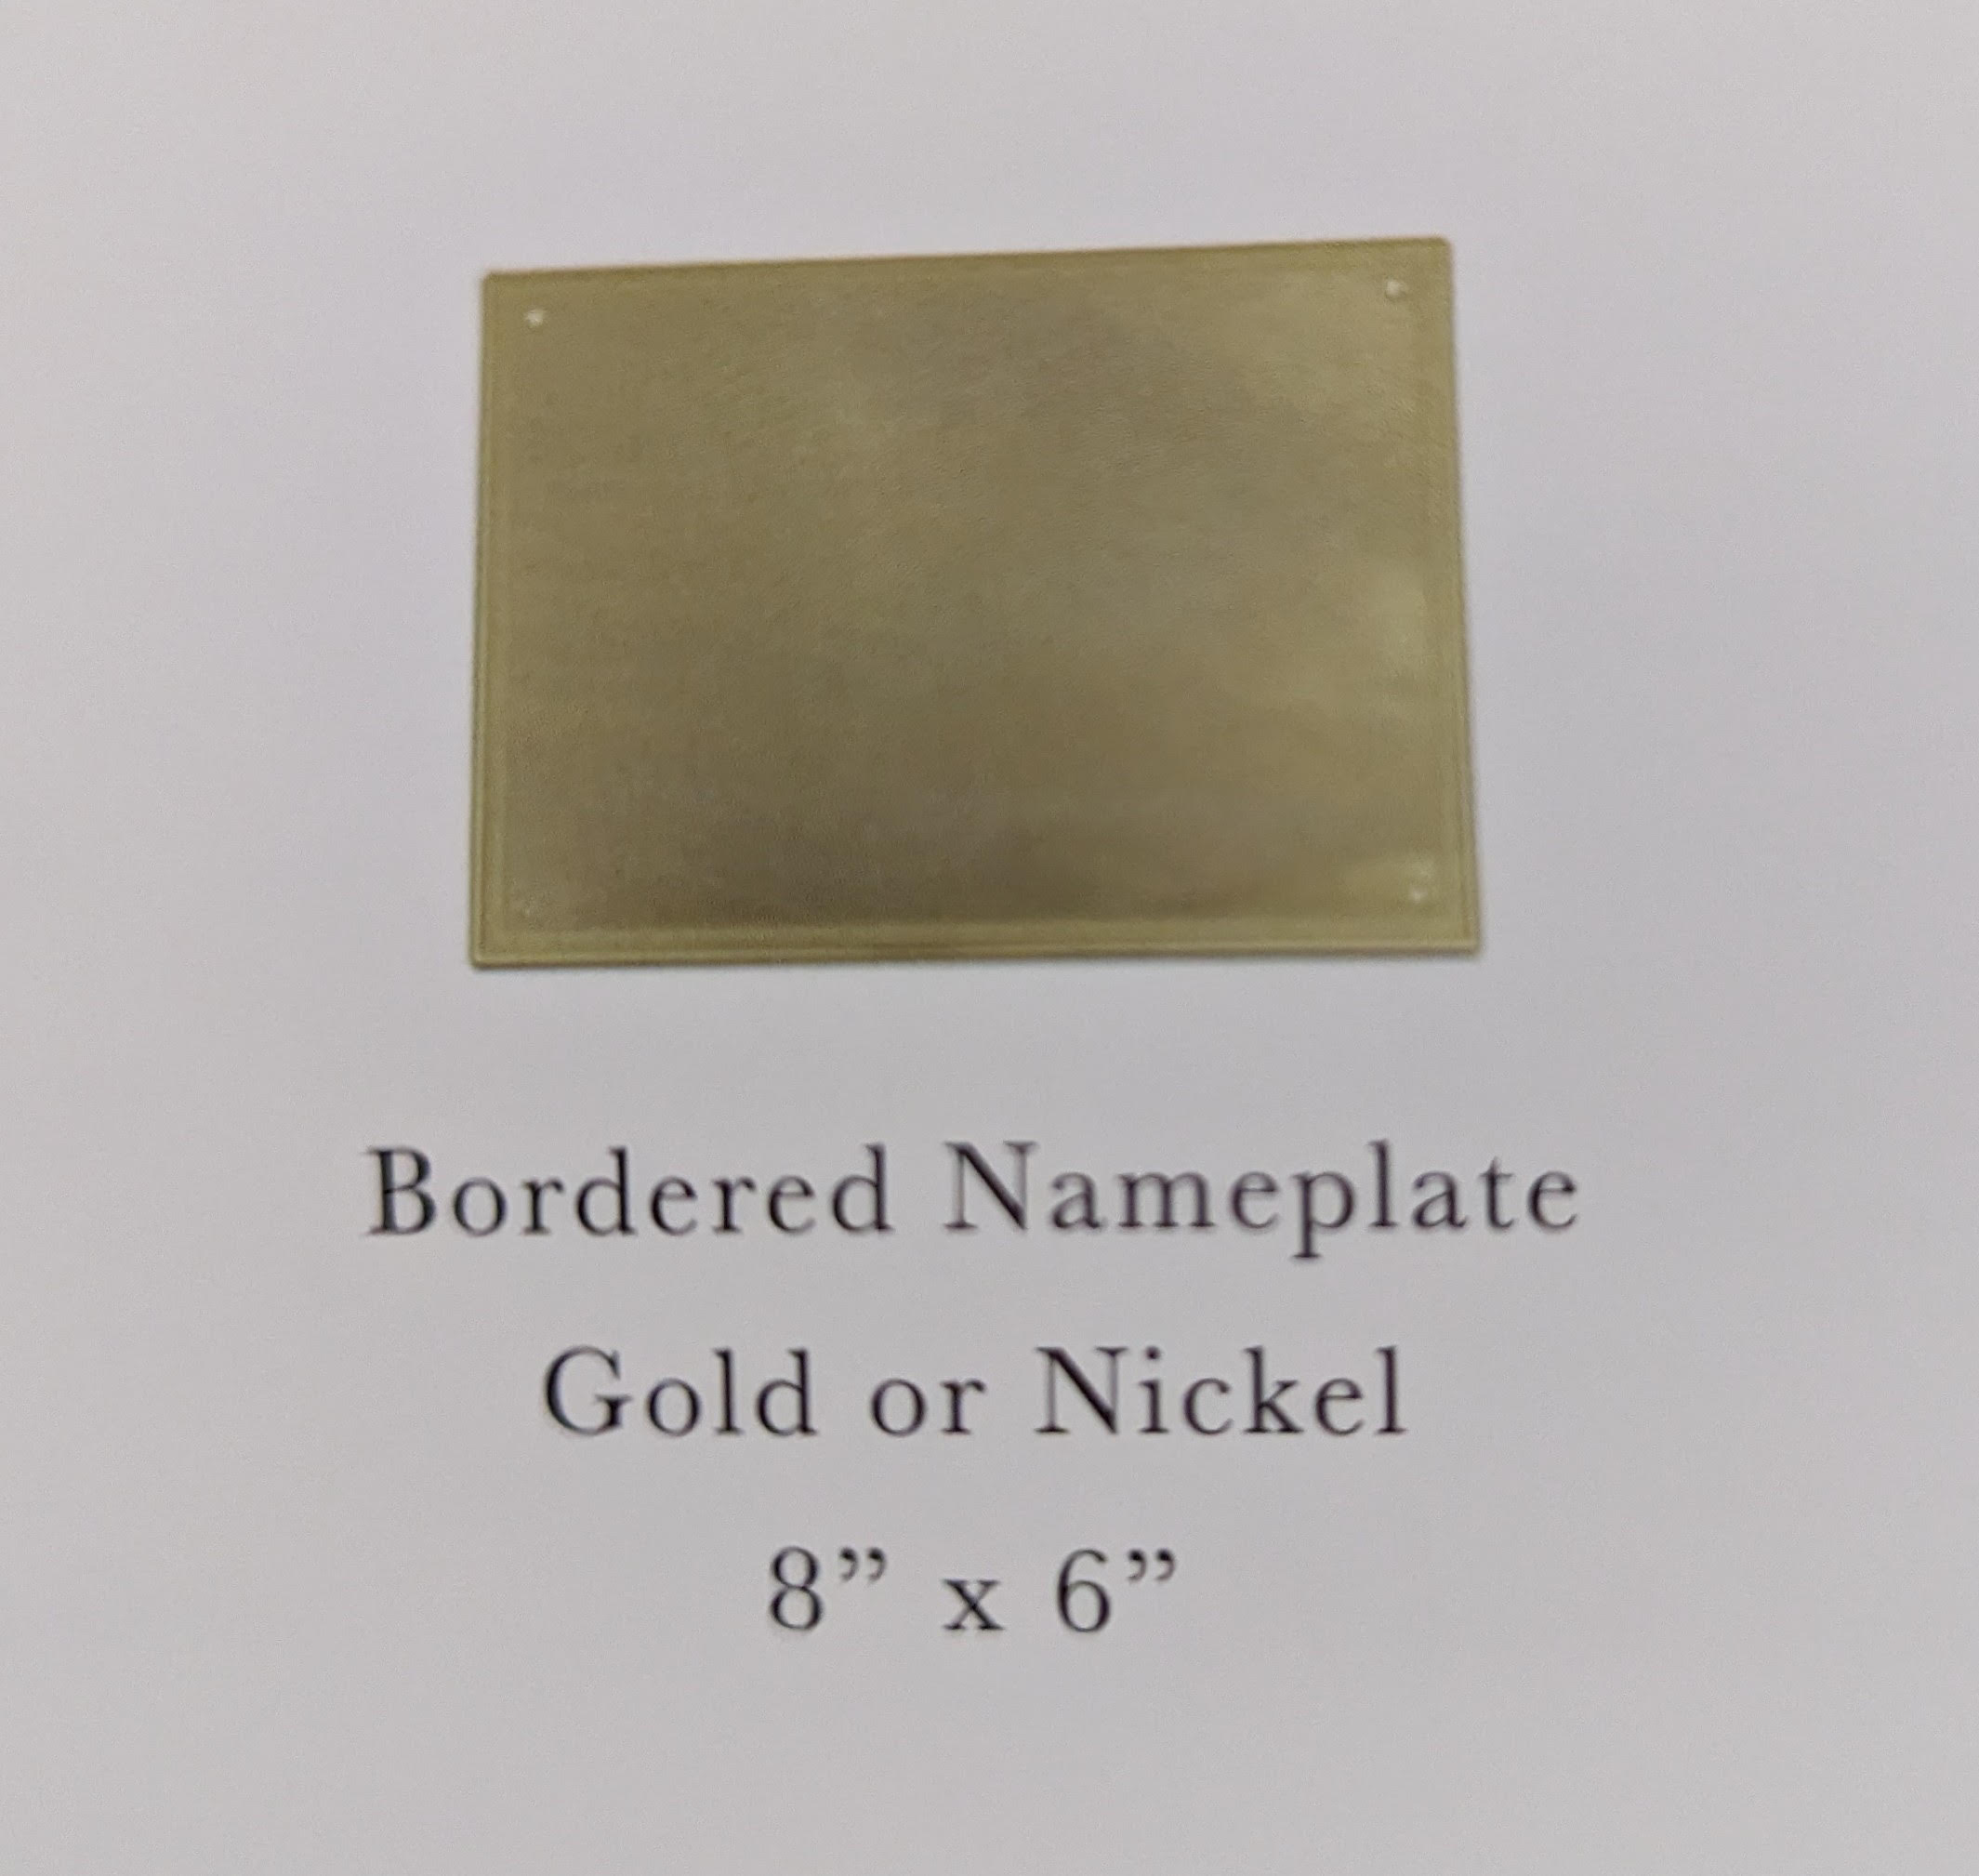 Bordered Nameplate Gold or Nickel 8'' x 6''